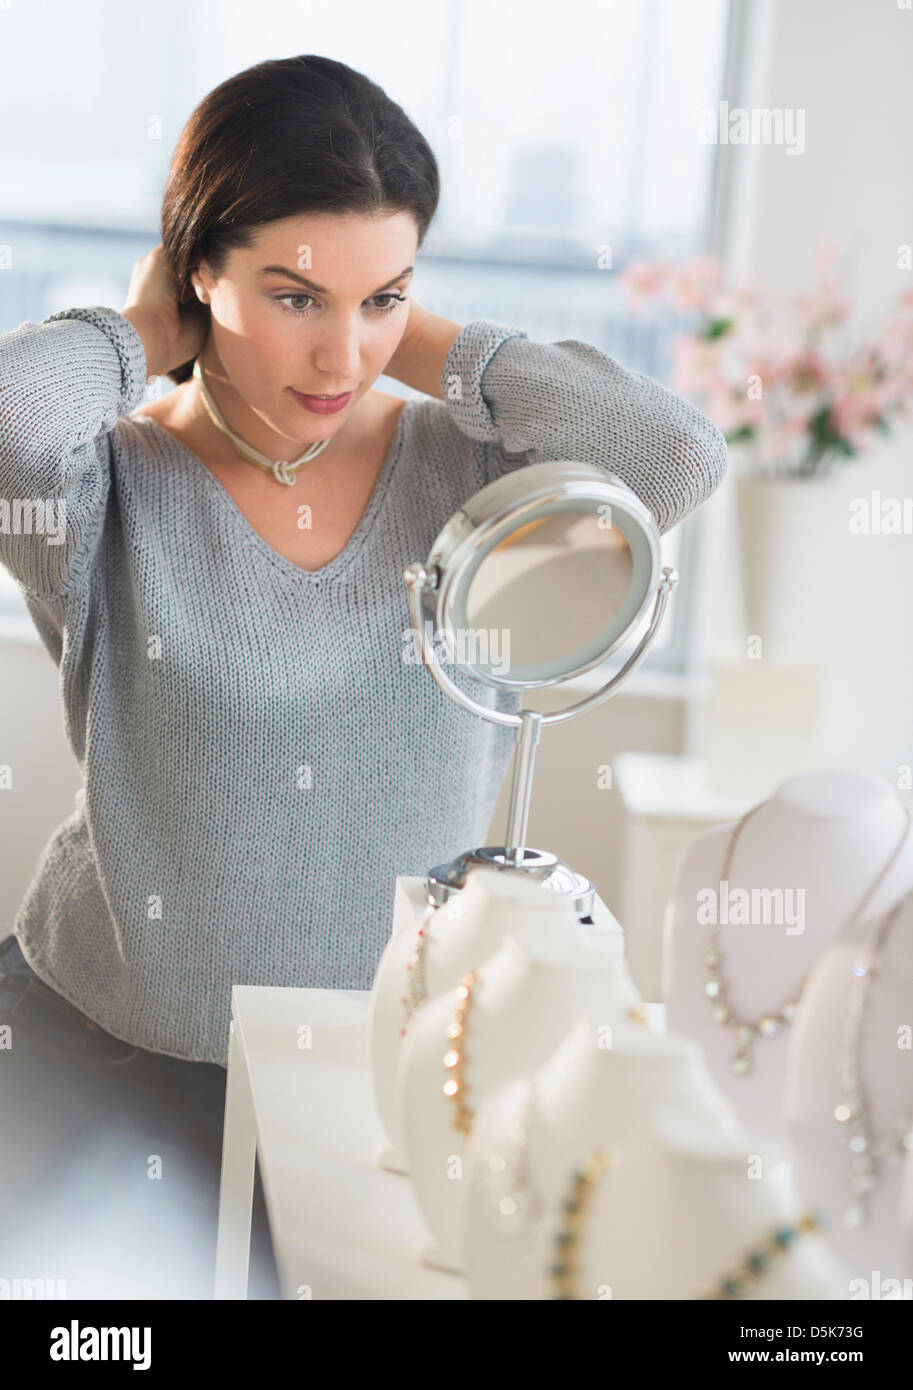 Woman trying on necklace Stock Photo